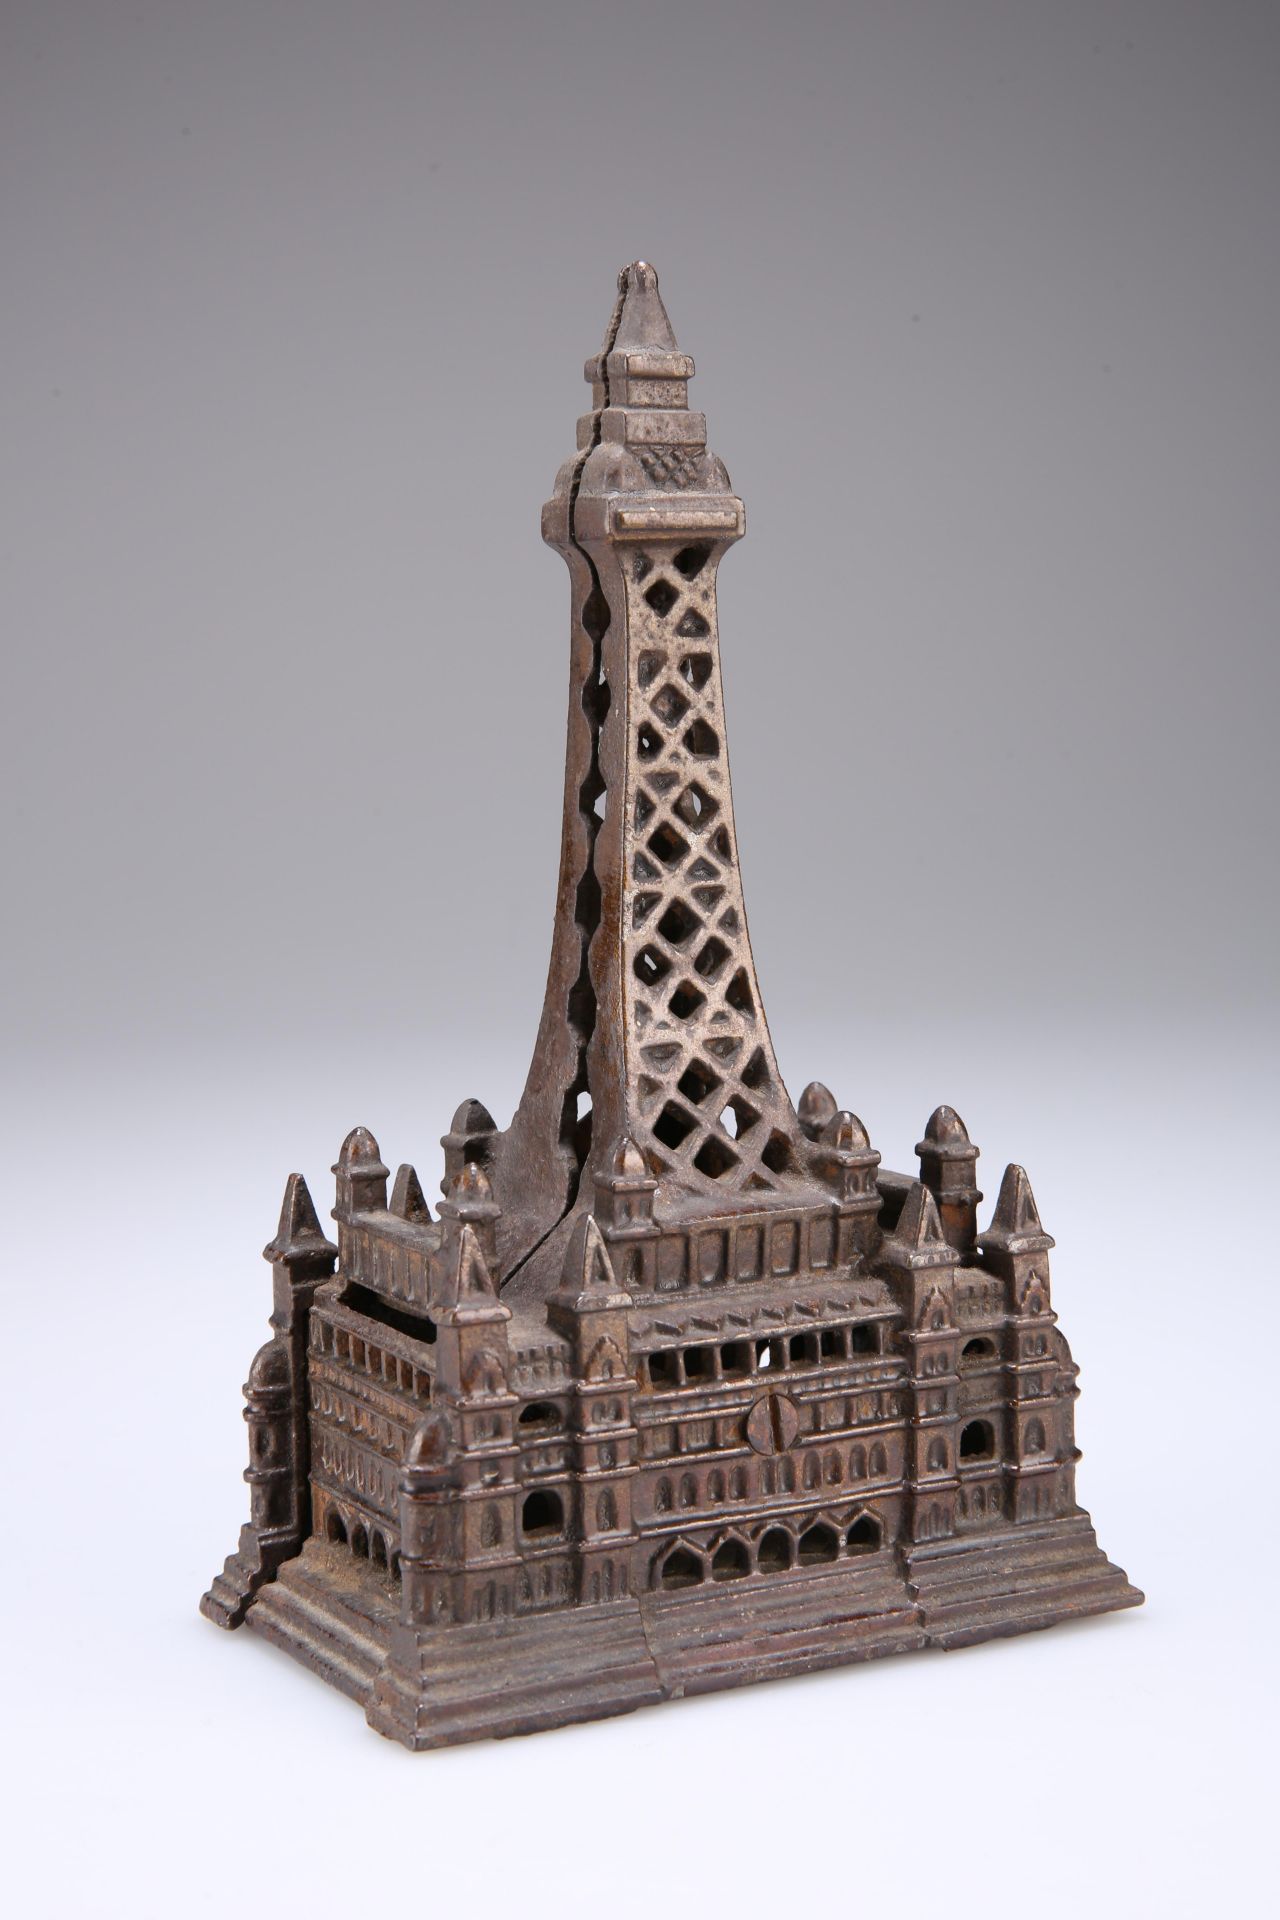 AN EDWARDIAN CAST IRON MONEY BOX IN THE FORM OF BLACKPOOL TOWER